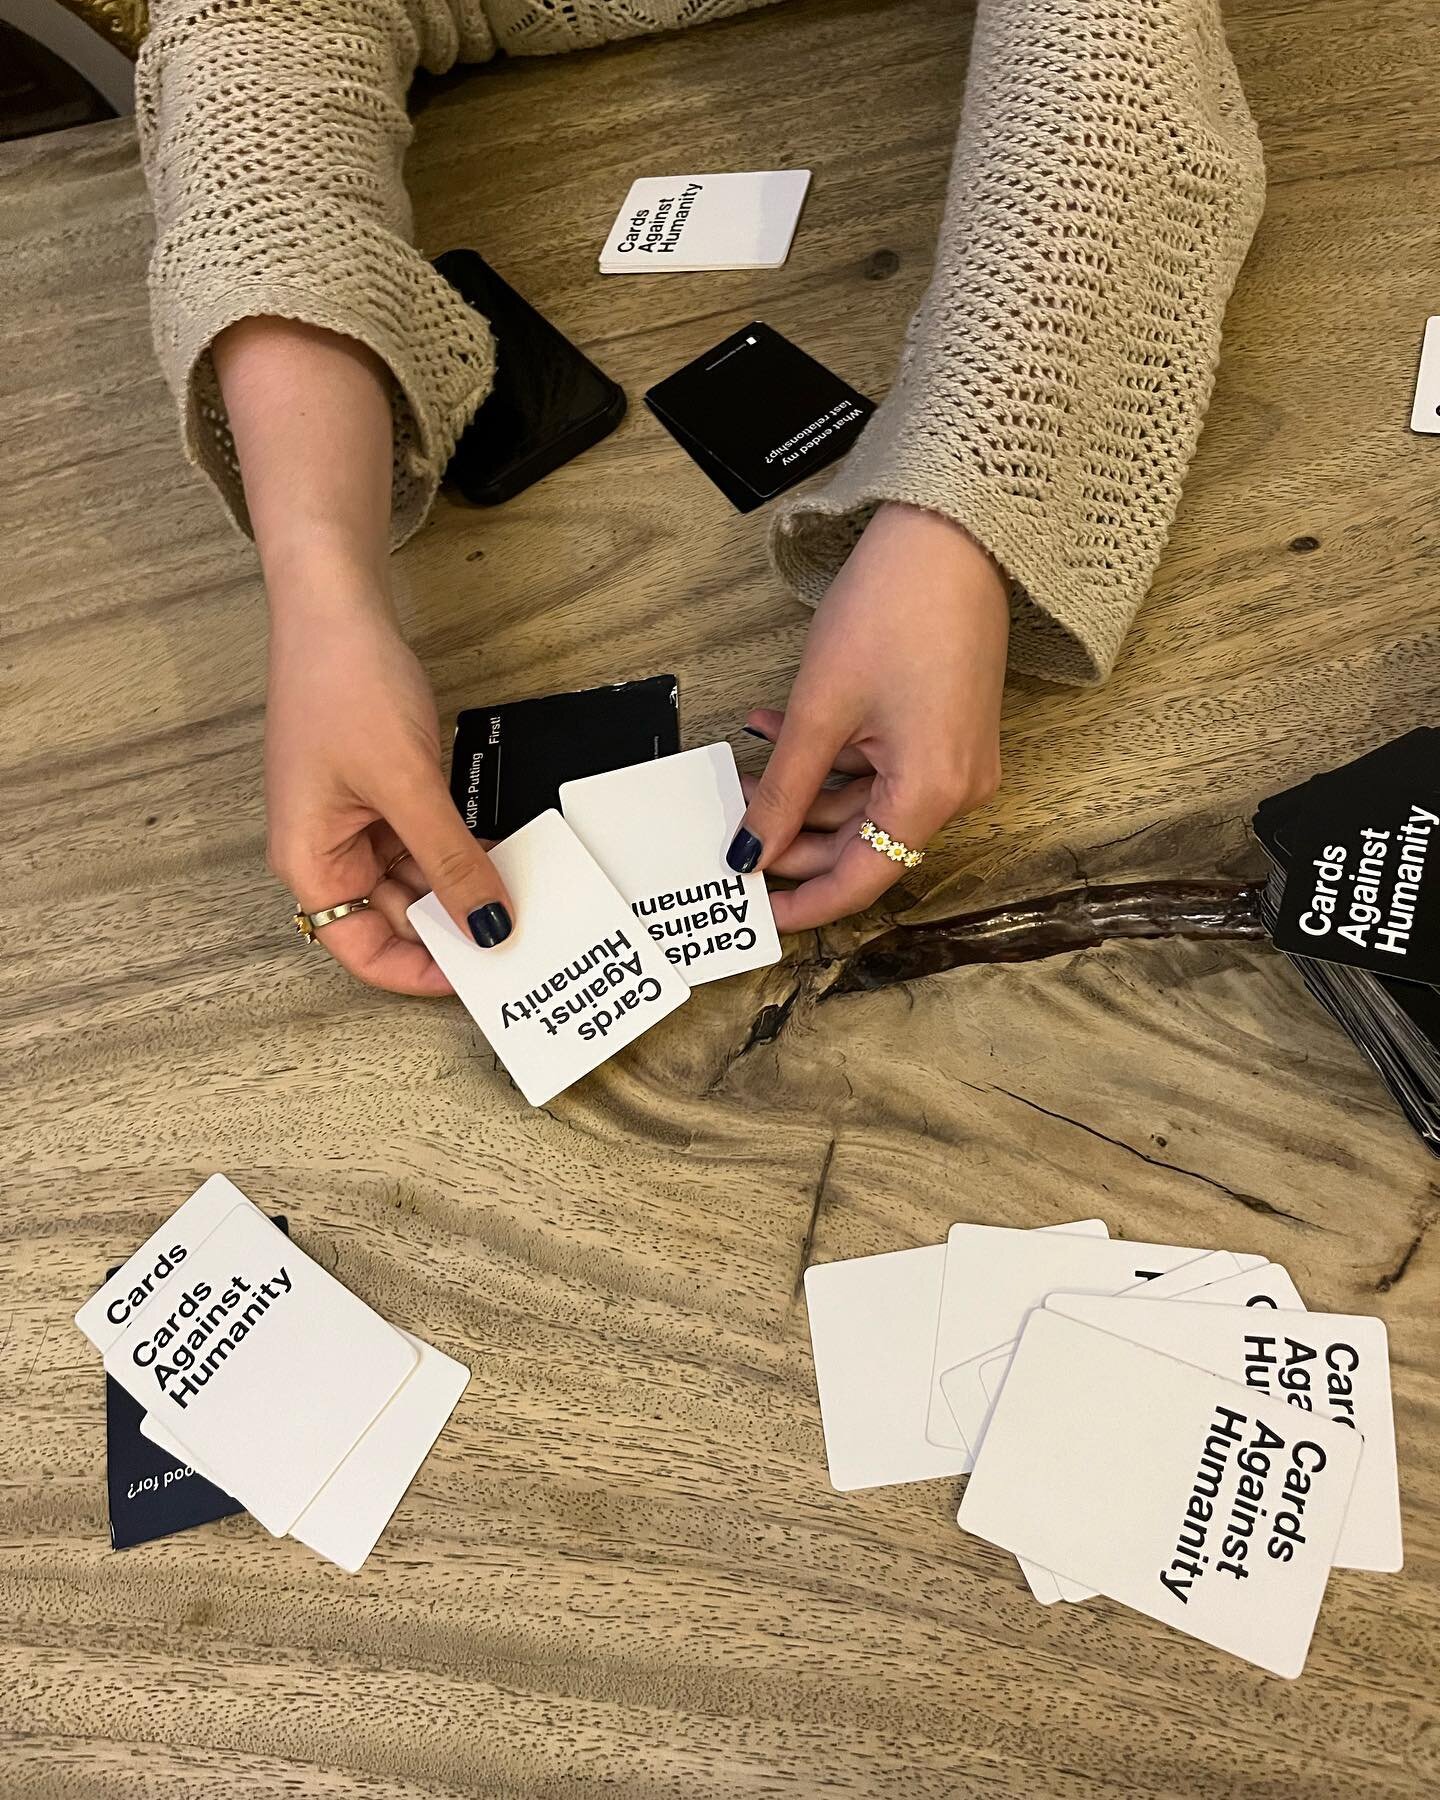 Playing cards against humanity is always a fun way to get to know people💕 #hostellife #hostel #london #hostellondon #londonhostel